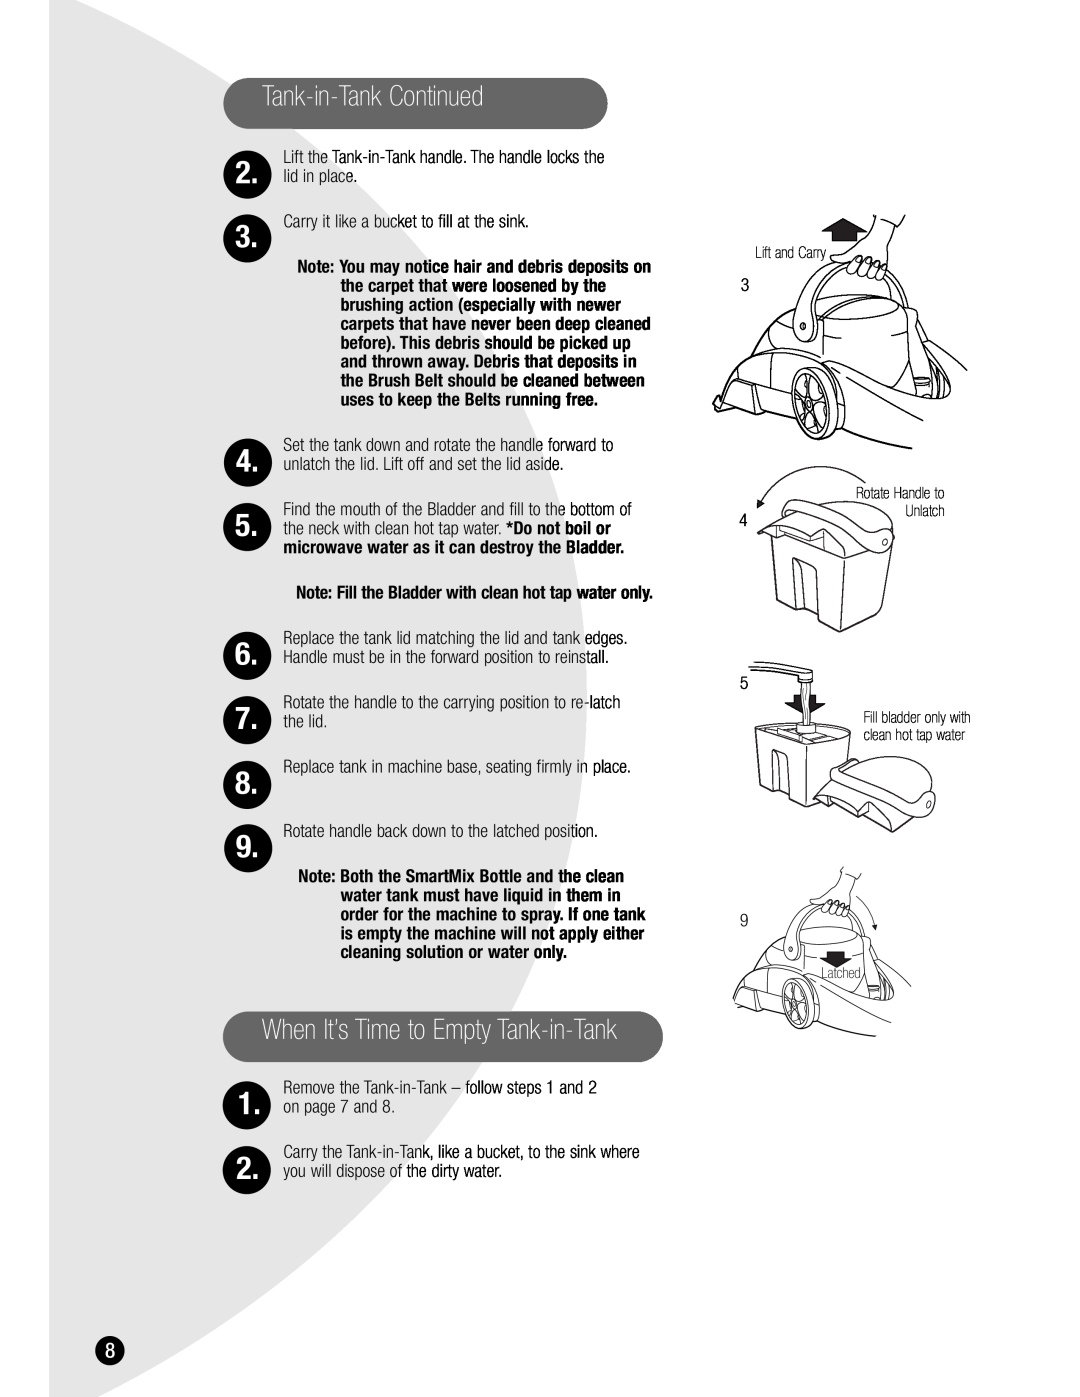 Bissell 7901 the lid, Remove the Tank-in-Tank - follow steps 1 and 1. on page 7 and, you will dispose of the dirty water 